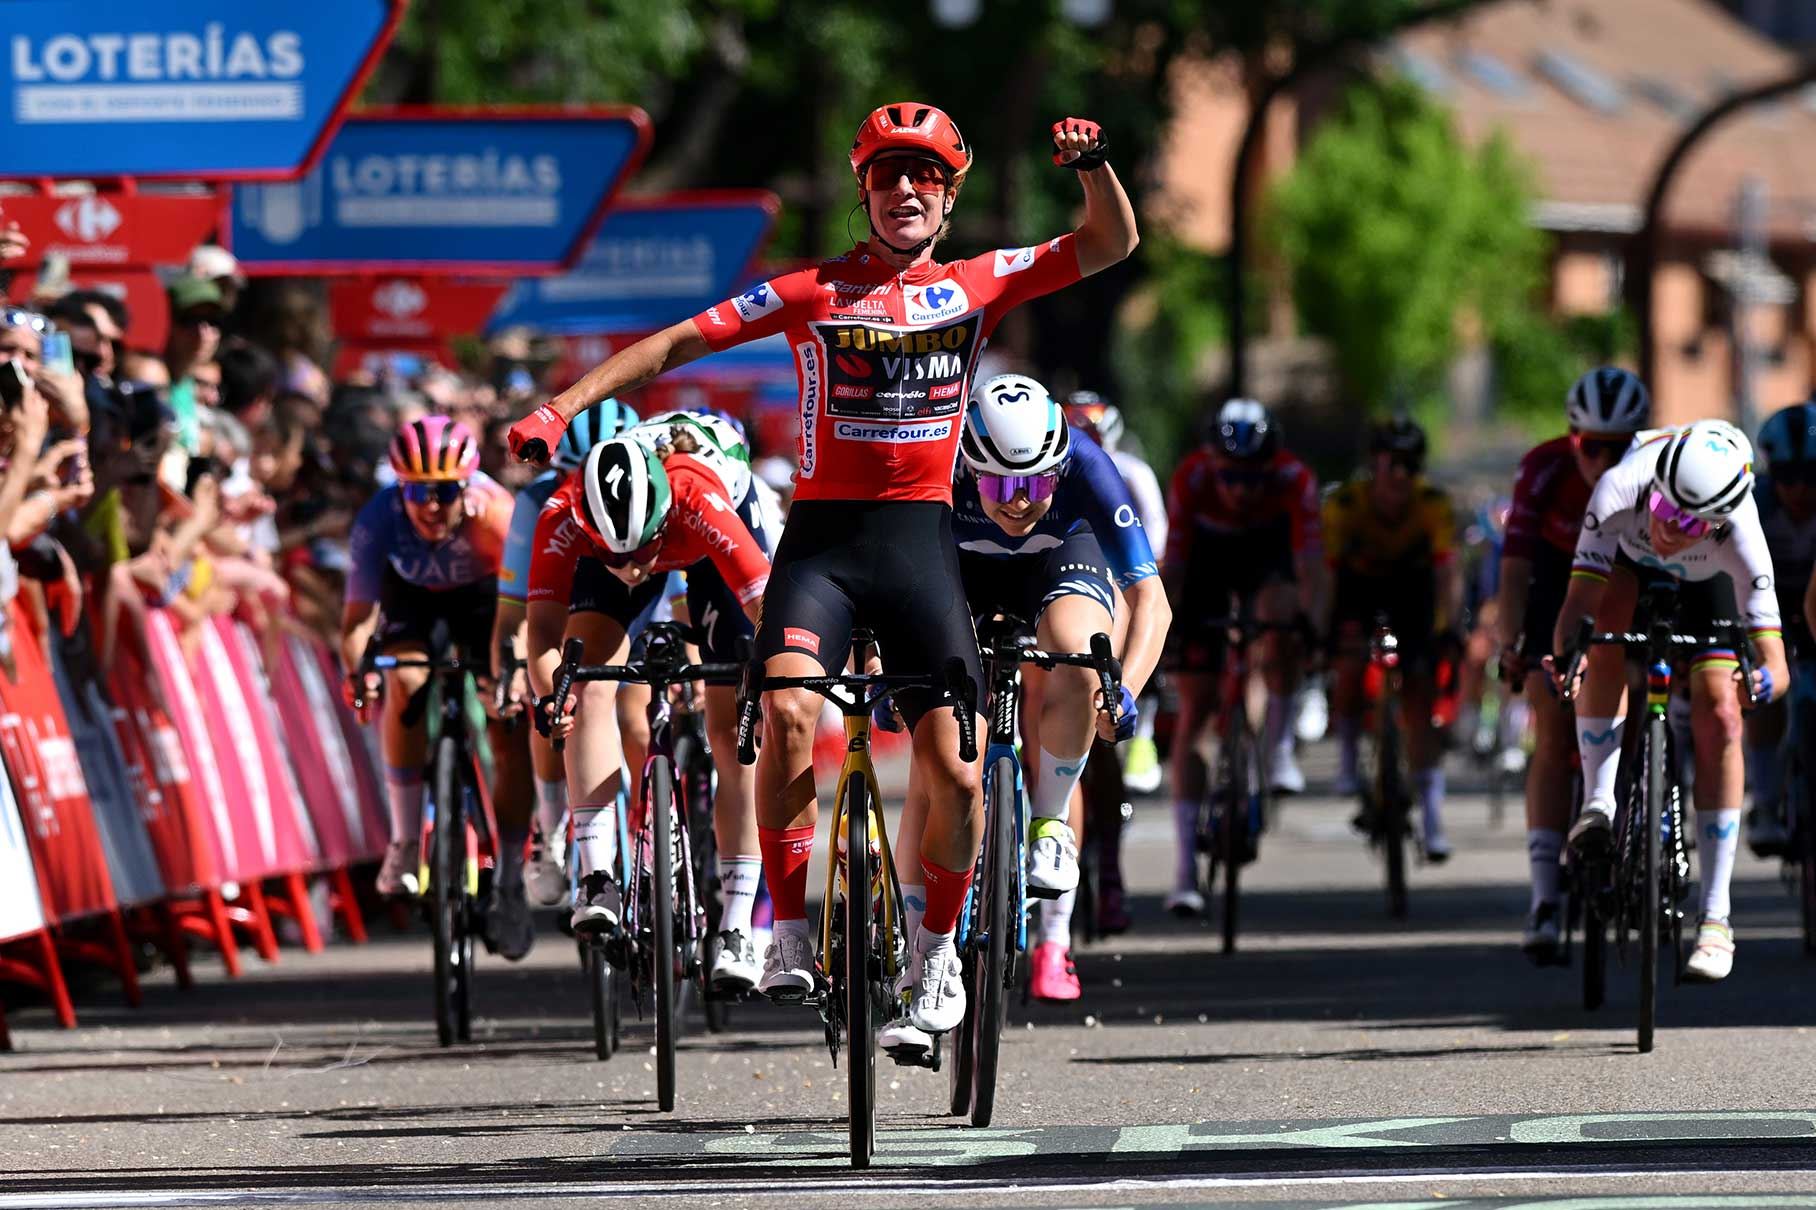 Marianne Vos wins Stage 4 of the Vuelta